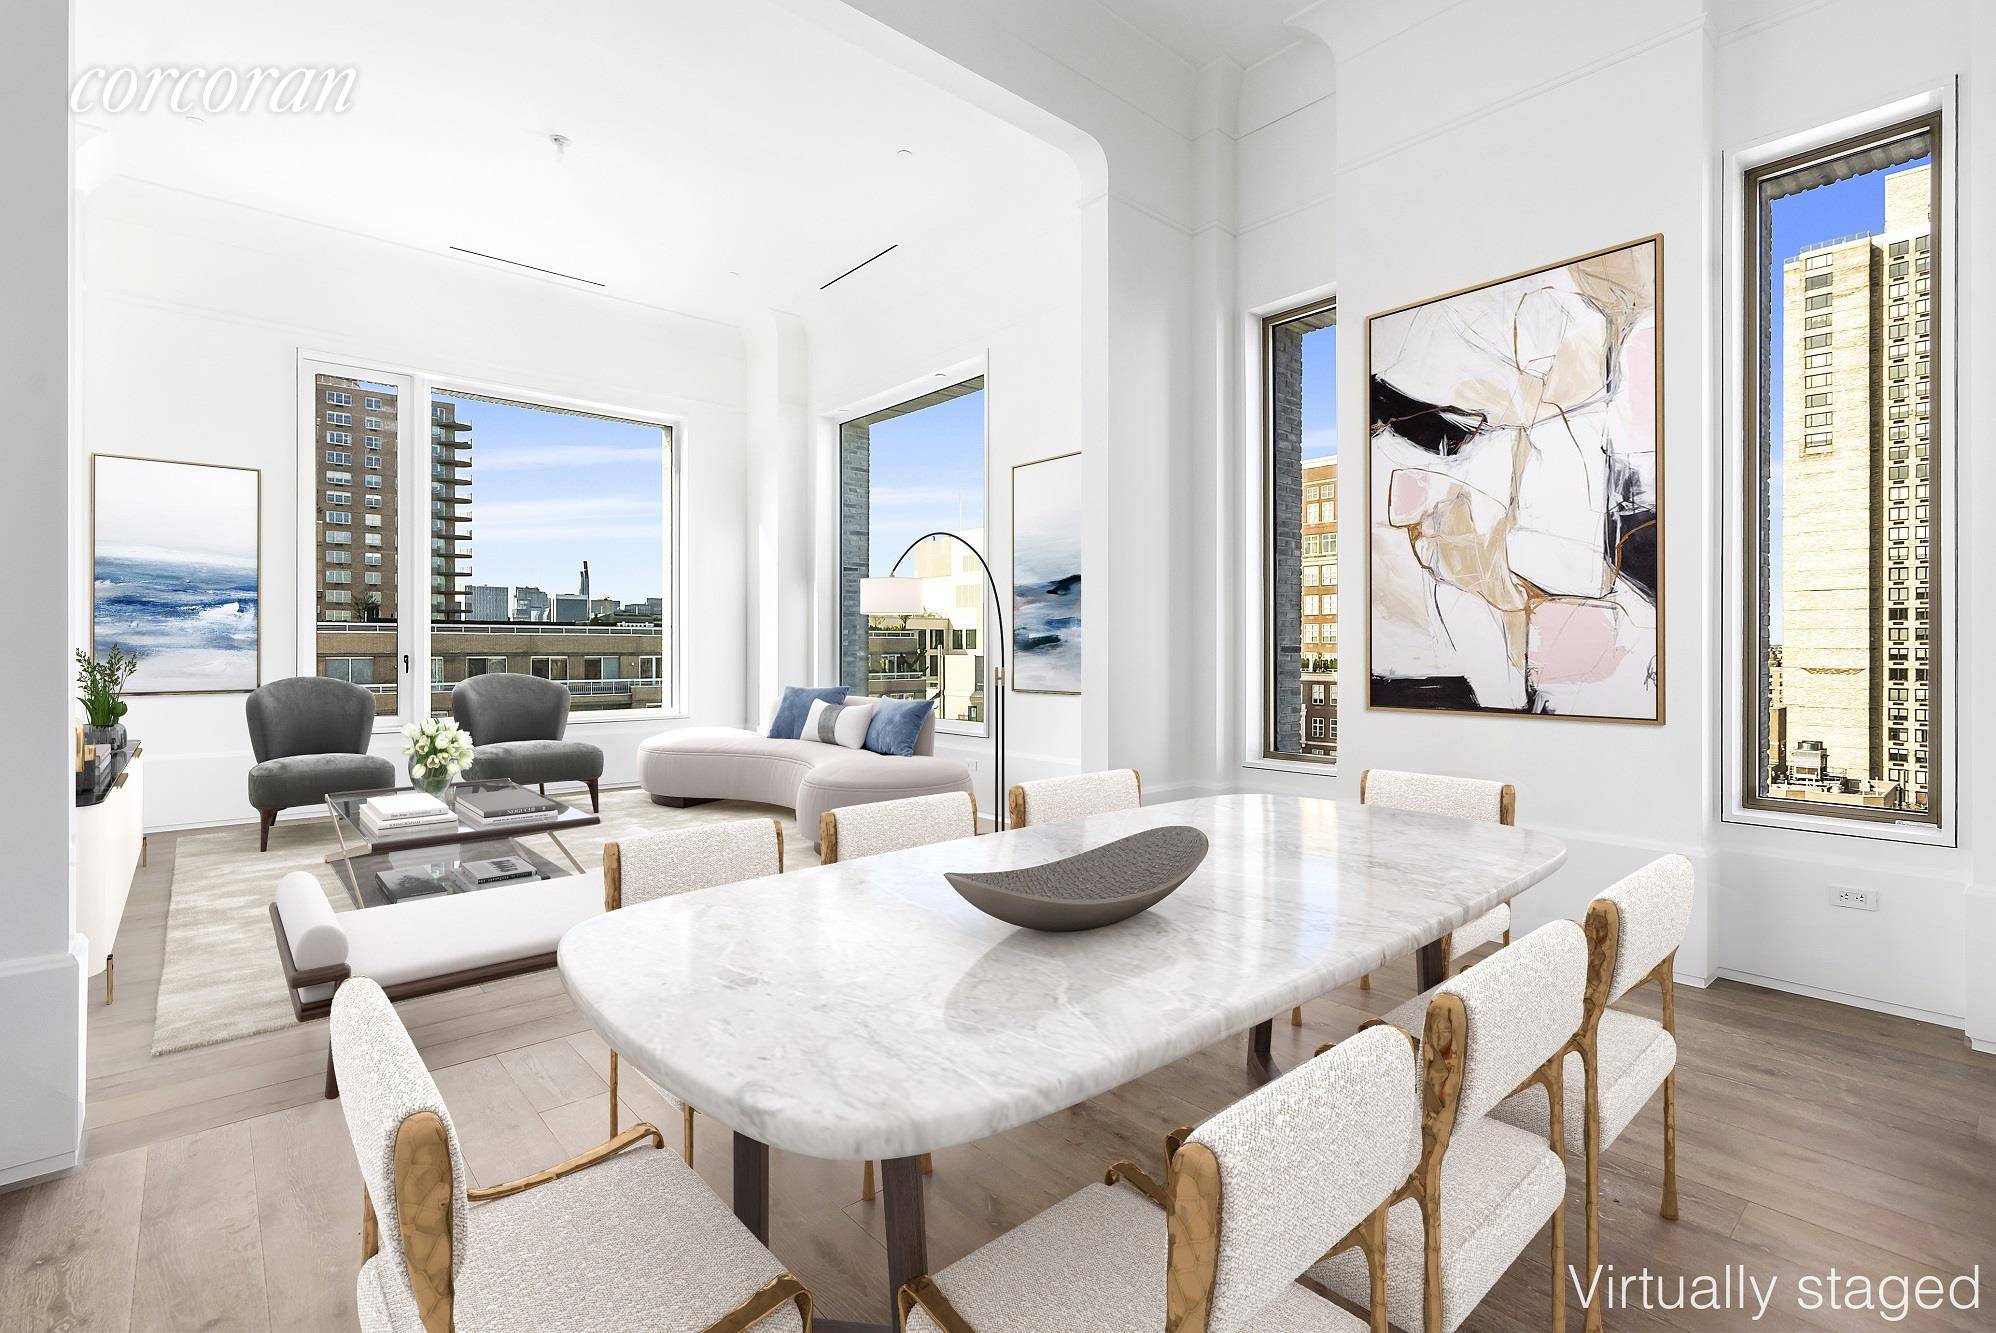 Residence 18B is a spectacular corner four bedroom, three and a half baths home with soaring 14 foot ceilings, and views to the North, West, and South.